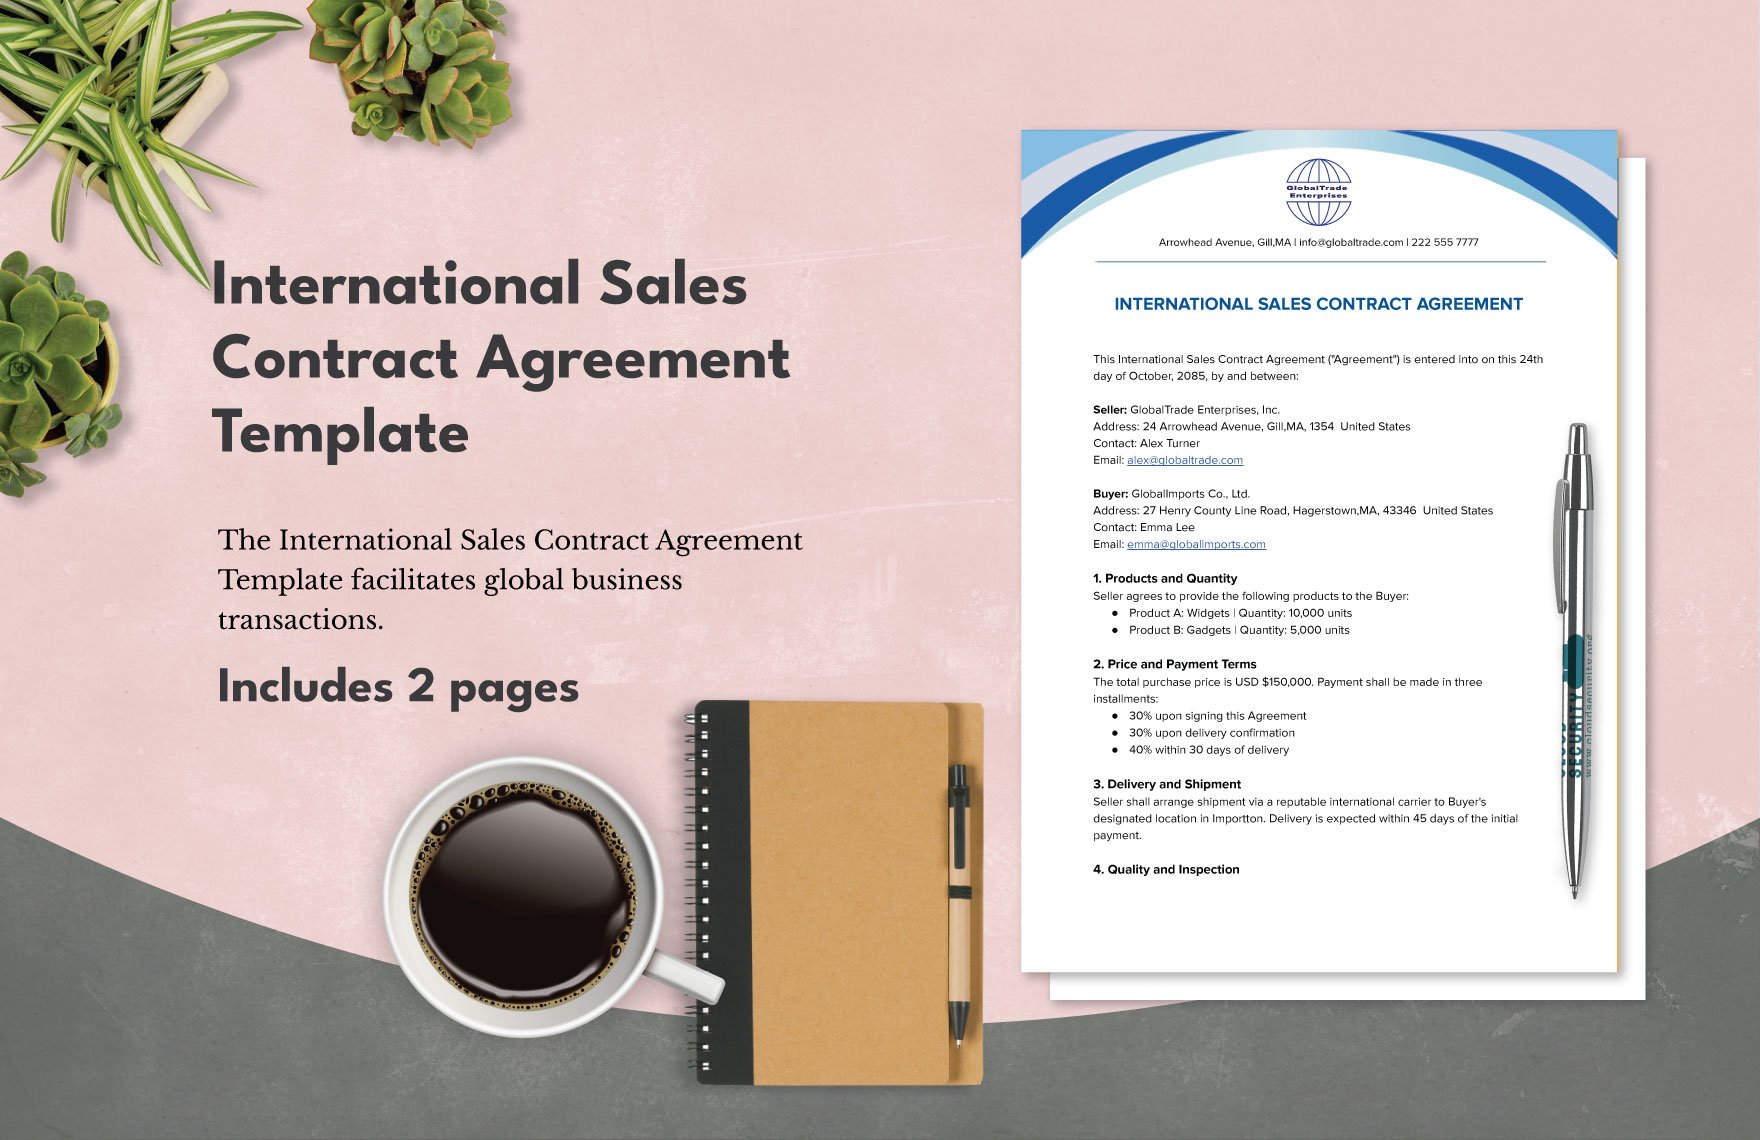 International Sales Contract Agreement Template